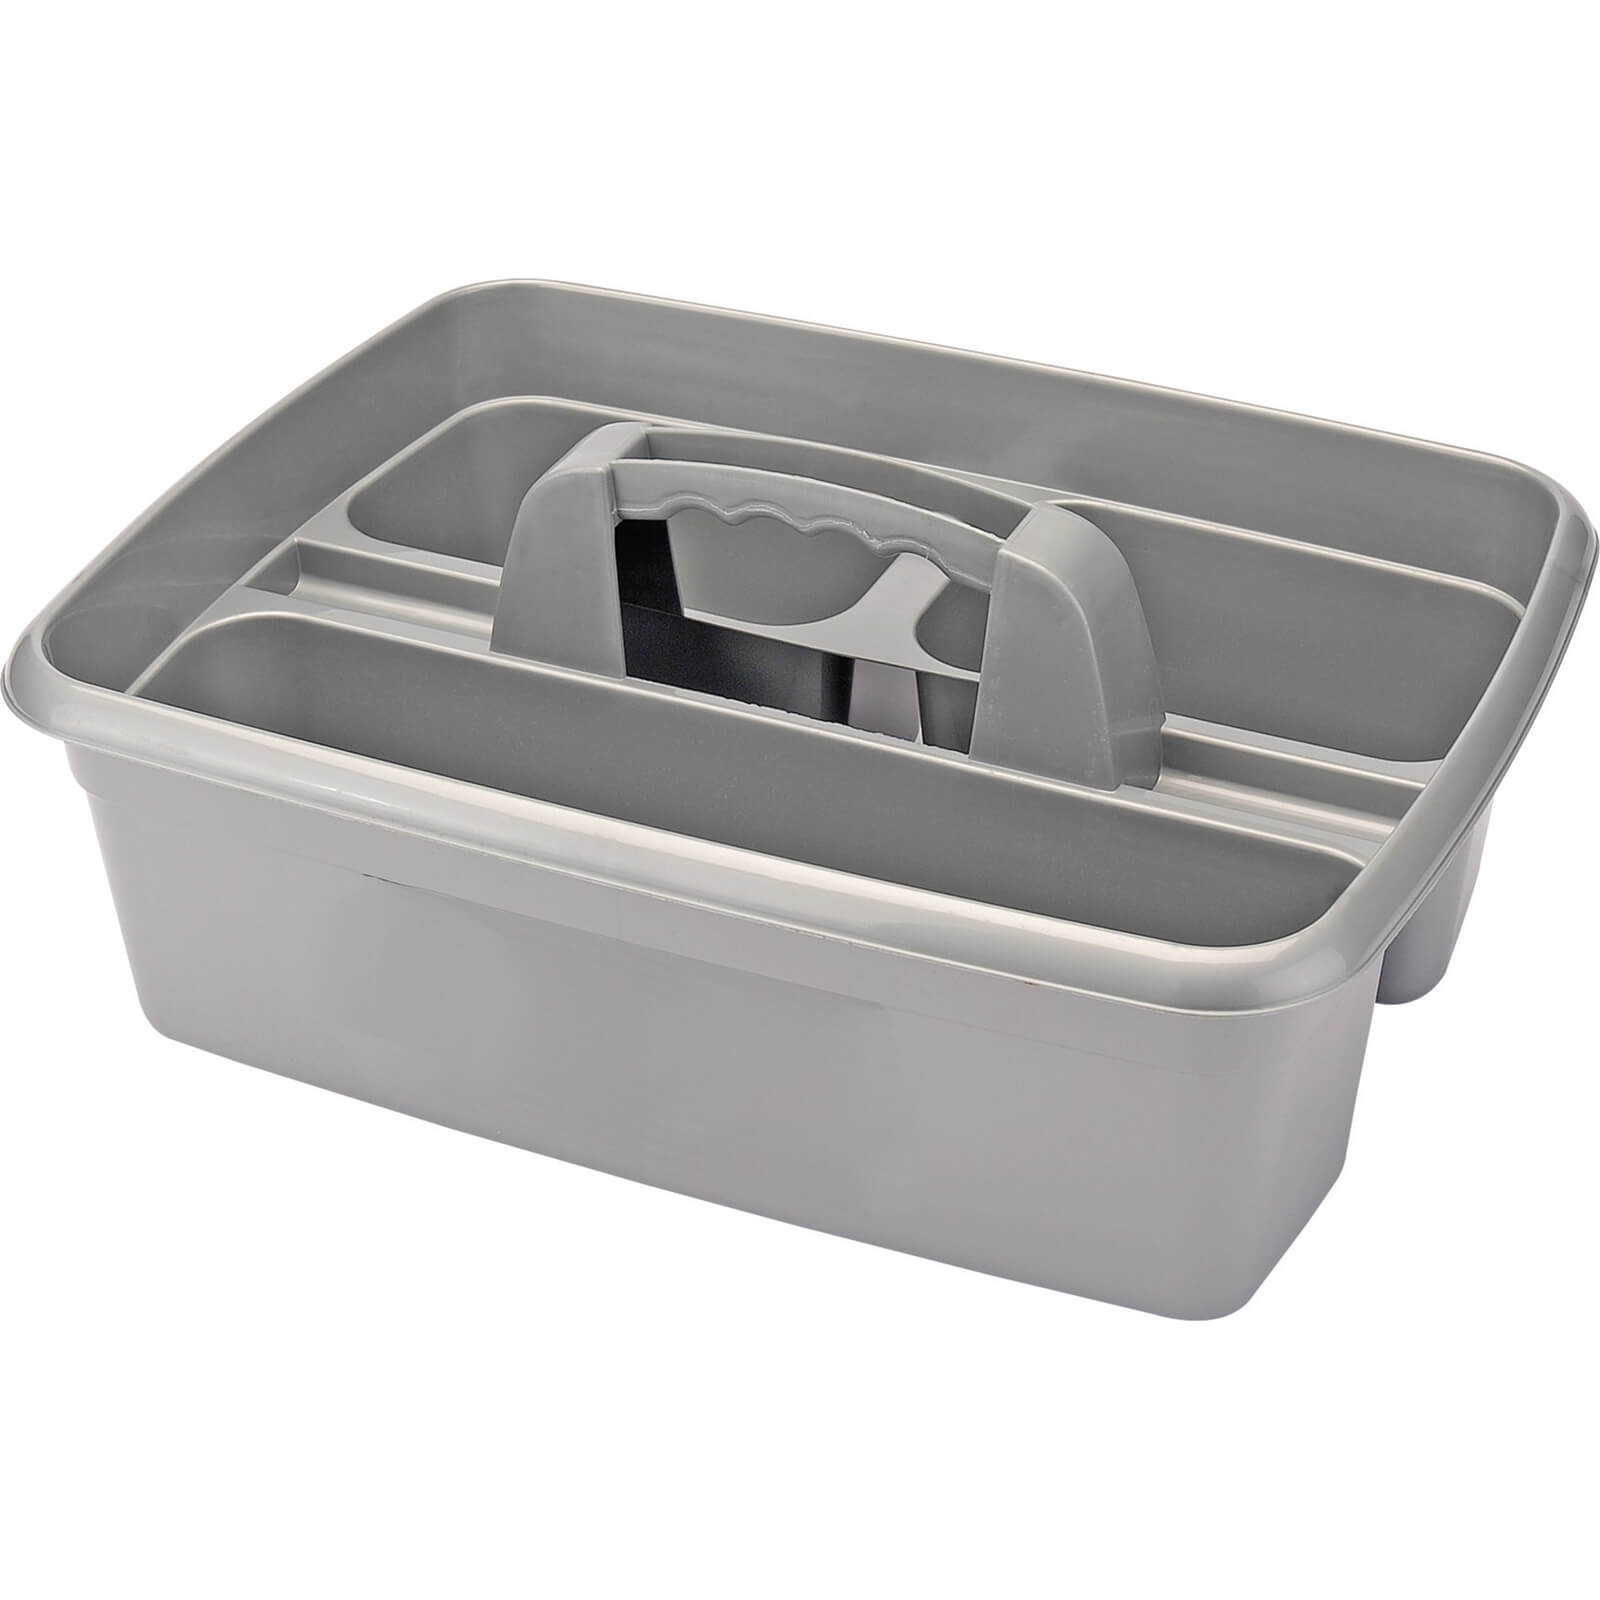 Photo of Draper 3 Compartment Cleaning Caddy / Tote Tray